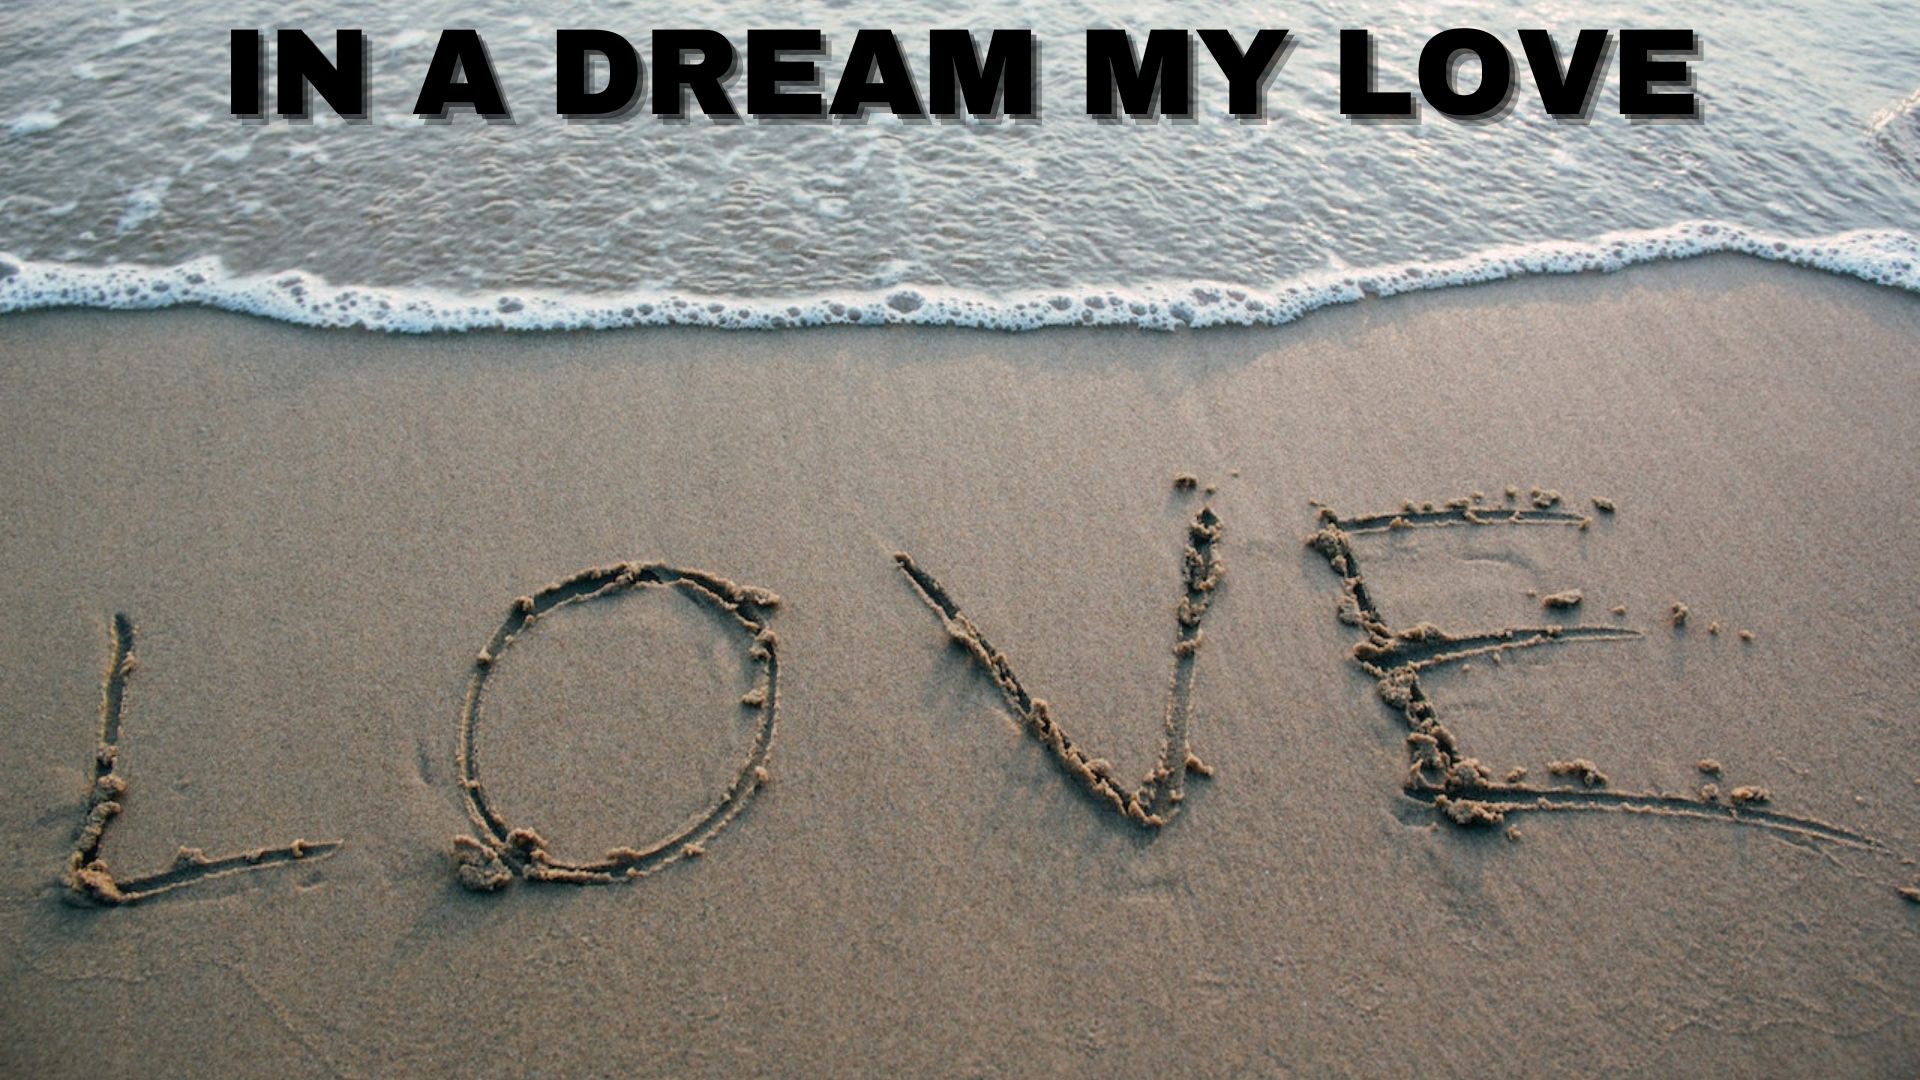 In A Dream My Love - It Refers To Happiness And Comfort